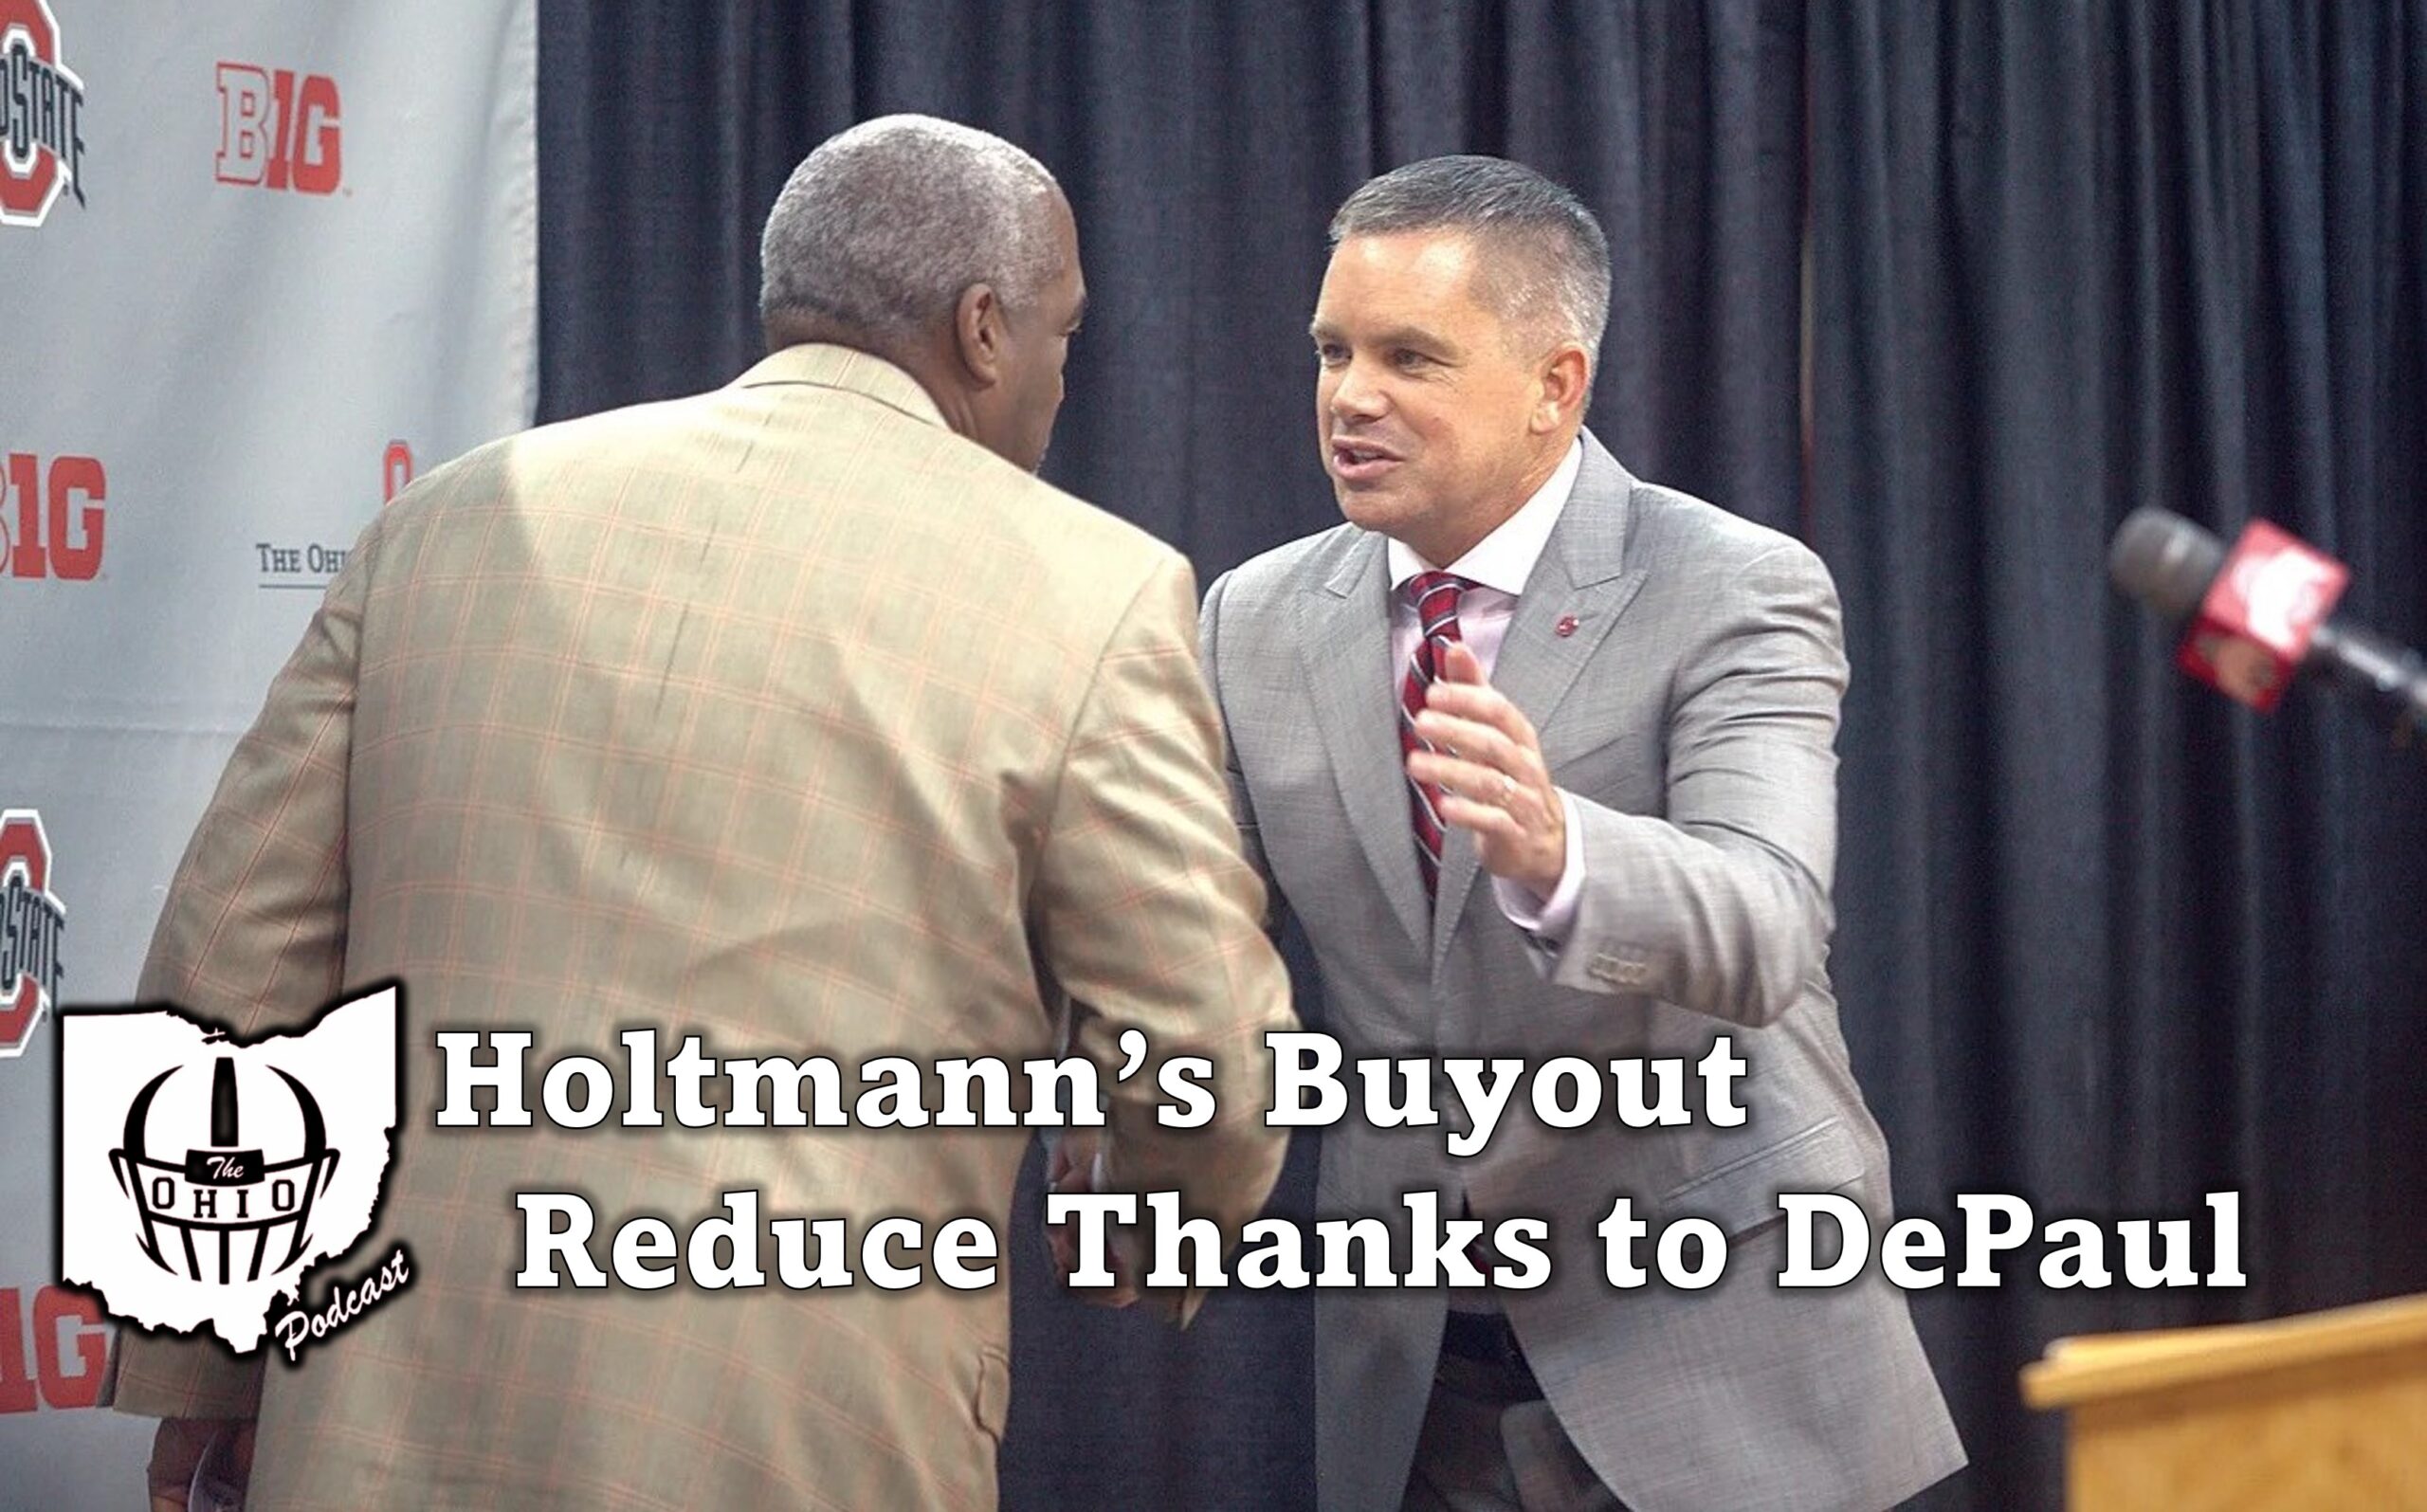 Holtmann's Buyout Reduced Thanks to DePaul.